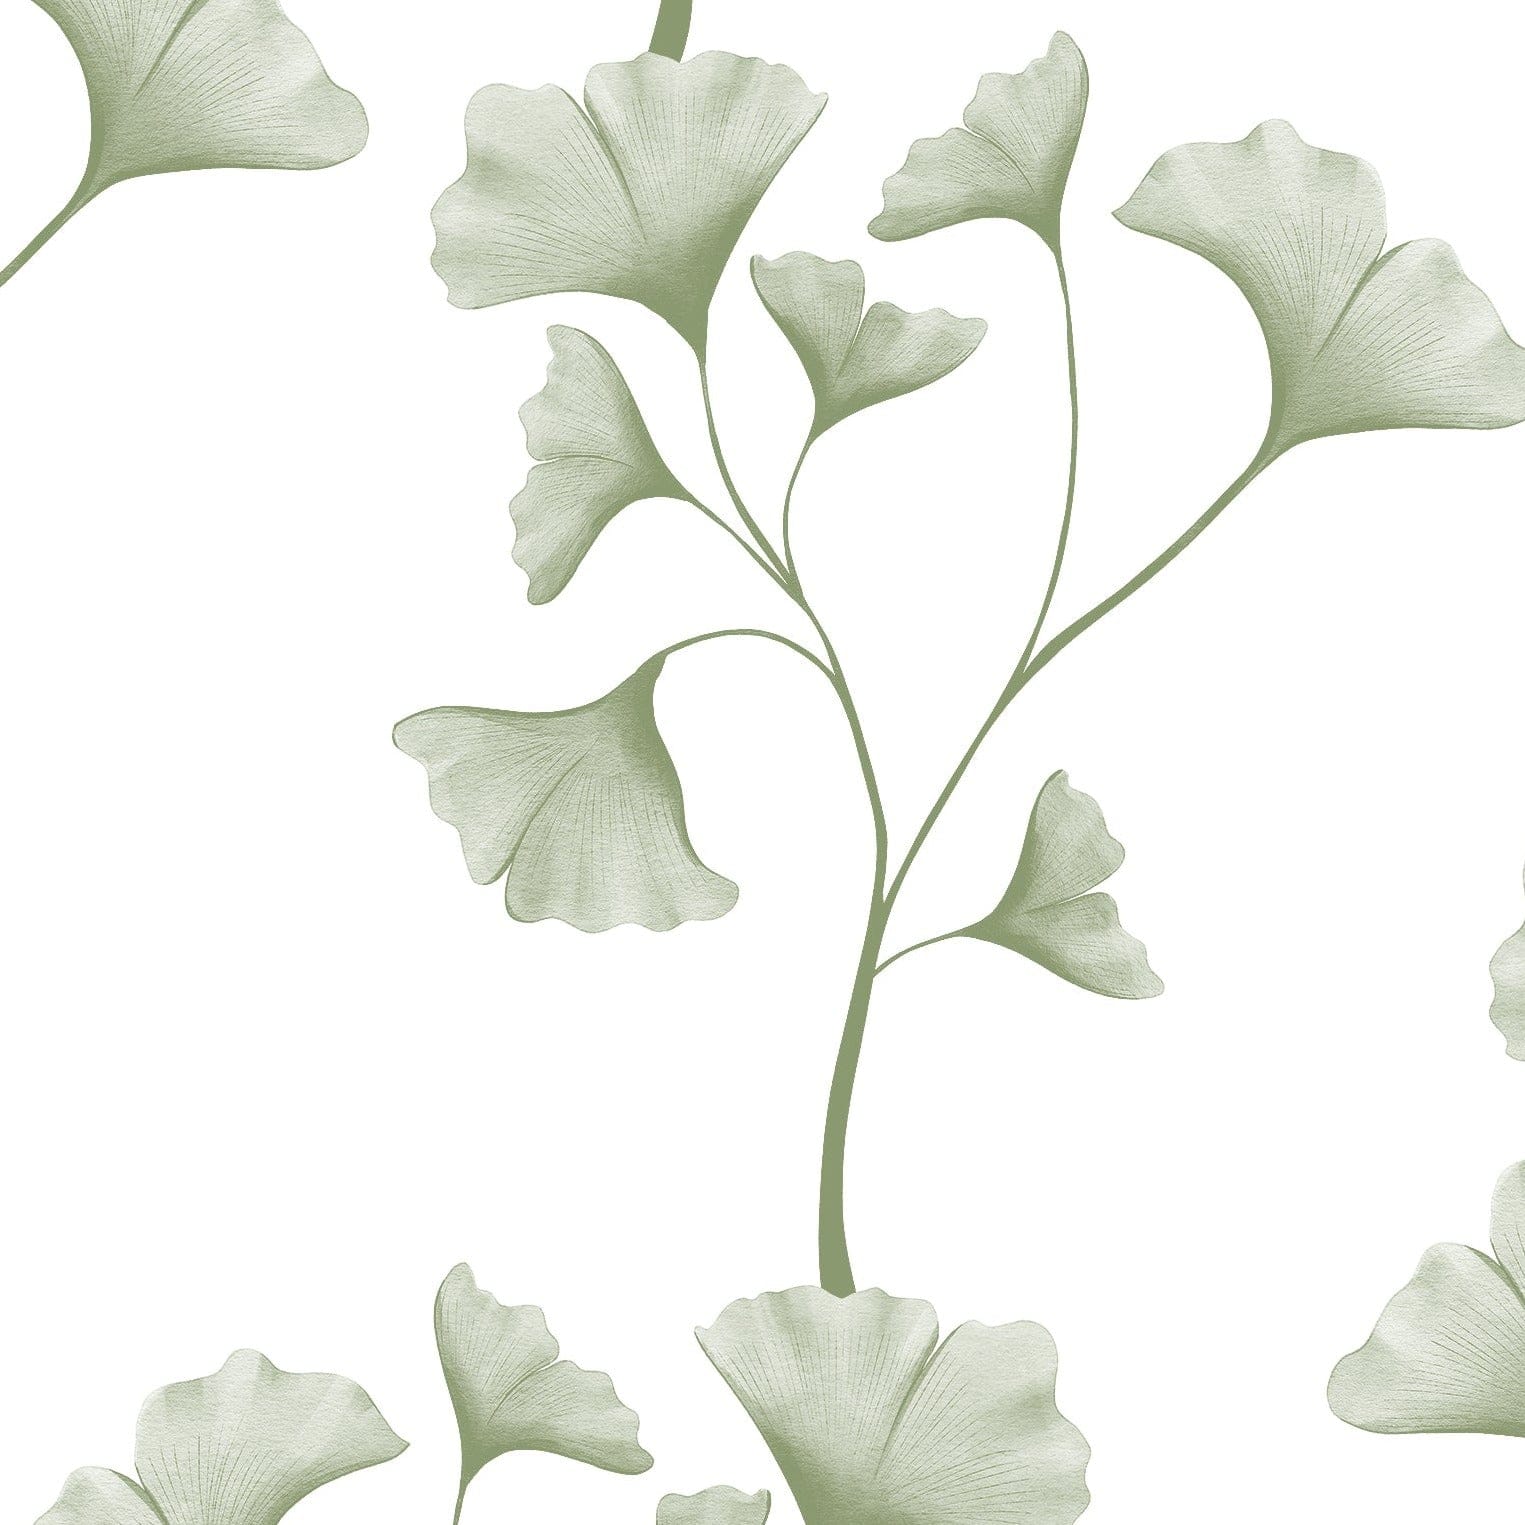 A close-up view of the Botanical Vines Wallpaper - 75", featuring a delicate pattern of stylized green ginkgo leaves on a soft white background. The leaves are spaced along thin, wavy vines, creating a gentle, flowing aesthetic that invokes a sense of calm and elegance.